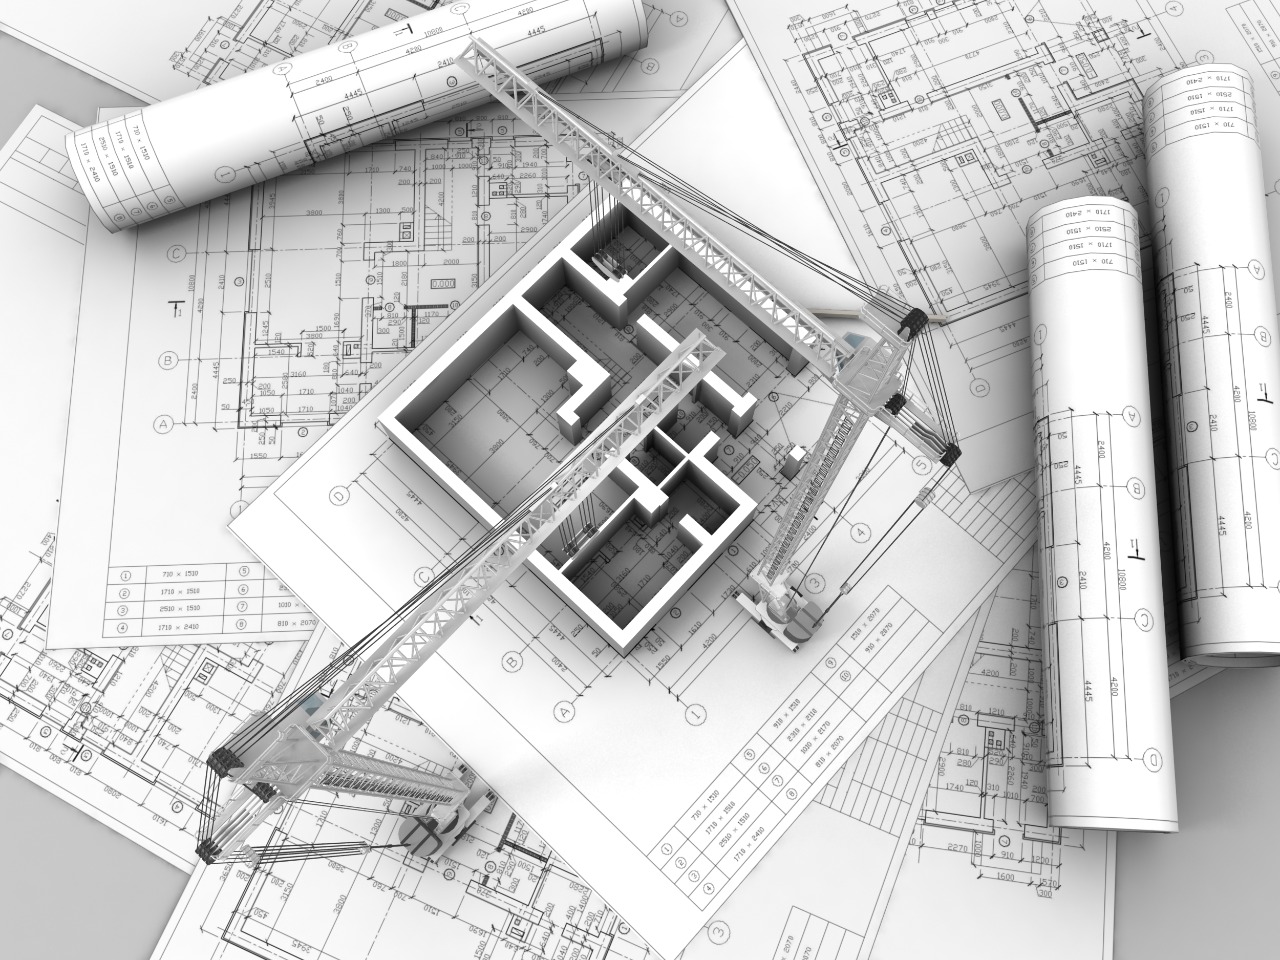 FACILITY PLANNING AND DESIGNING